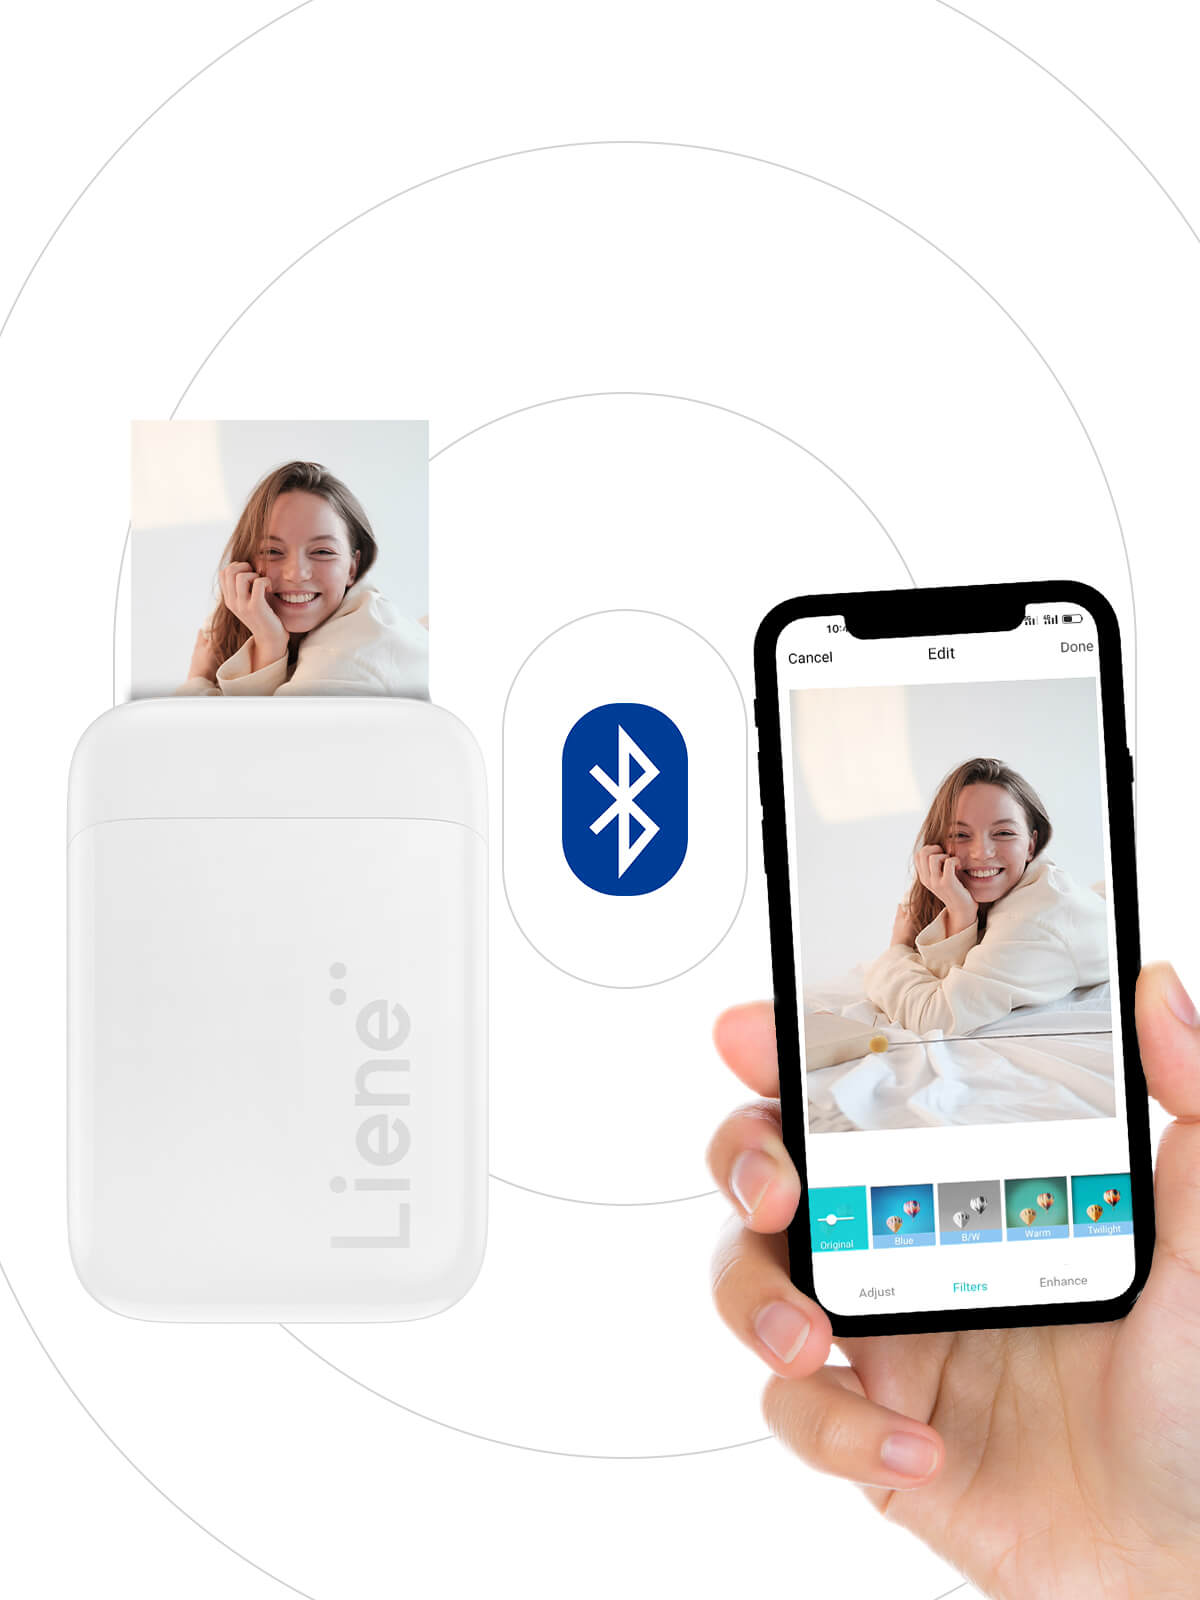 Liene Pearl photo printer enables fast printing by connecting to Bluetooth 5.0